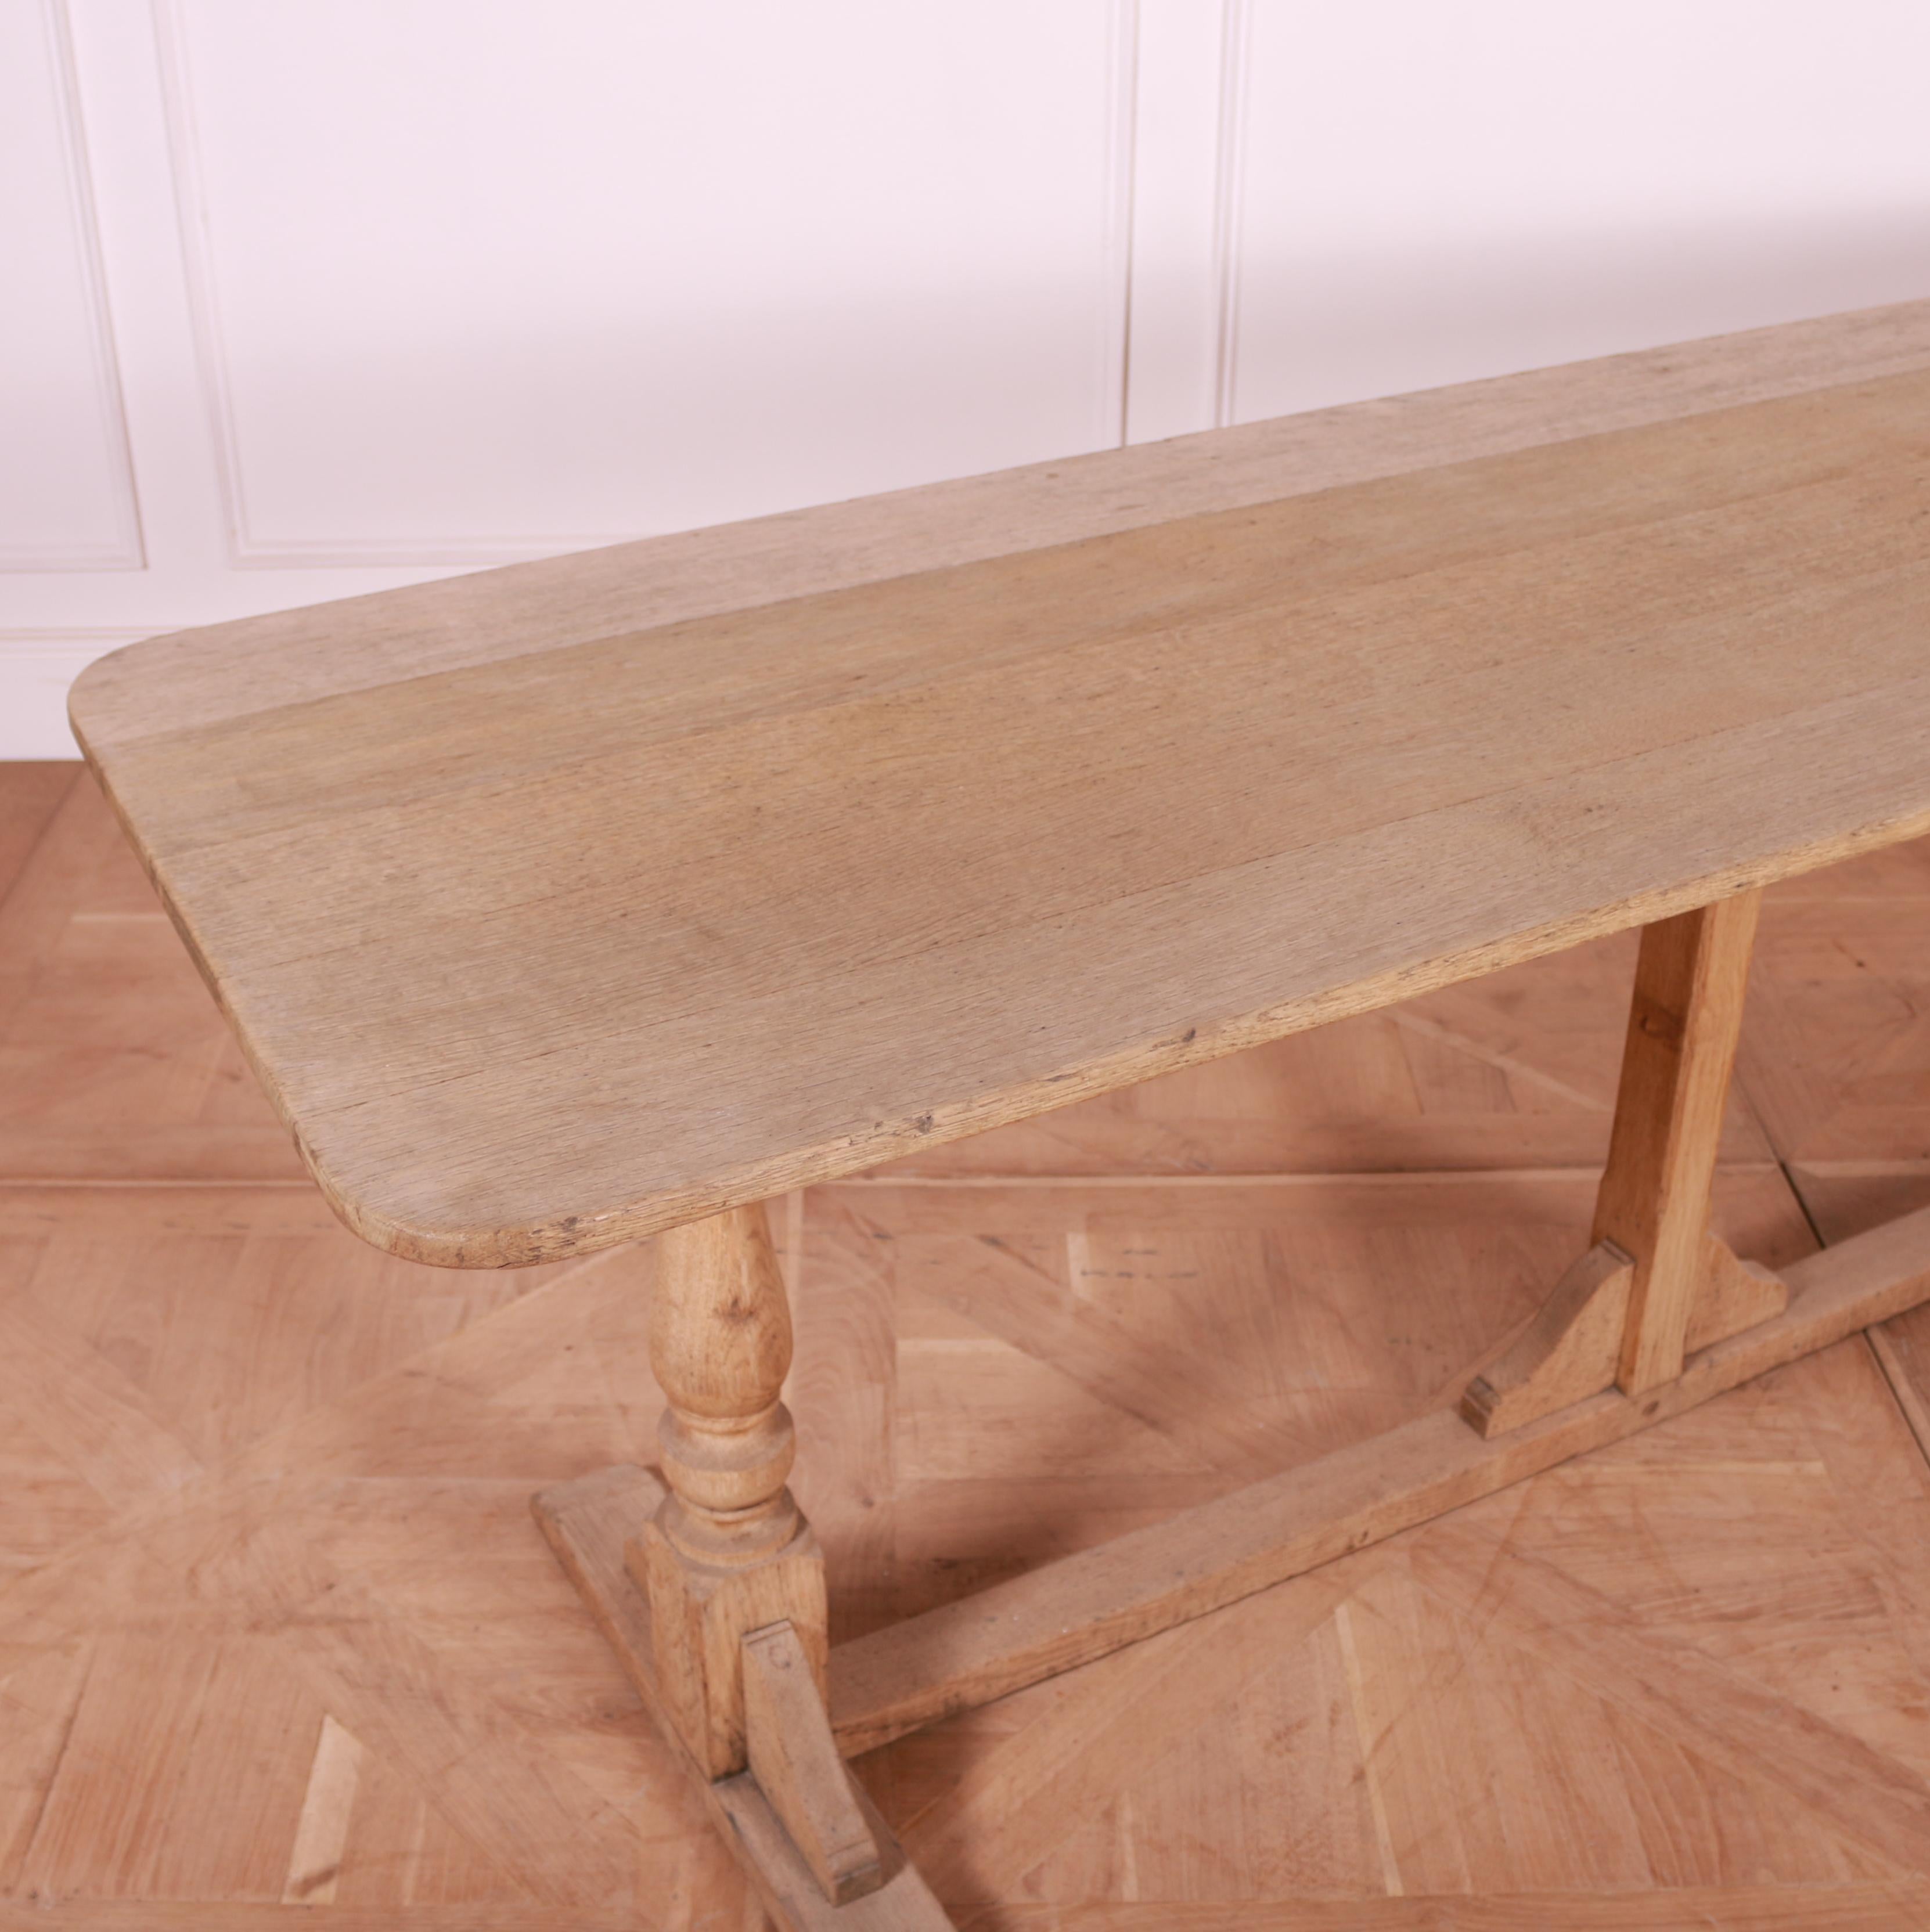 Bleached Oak Trestle Table In Good Condition For Sale In Leamington Spa, Warwickshire